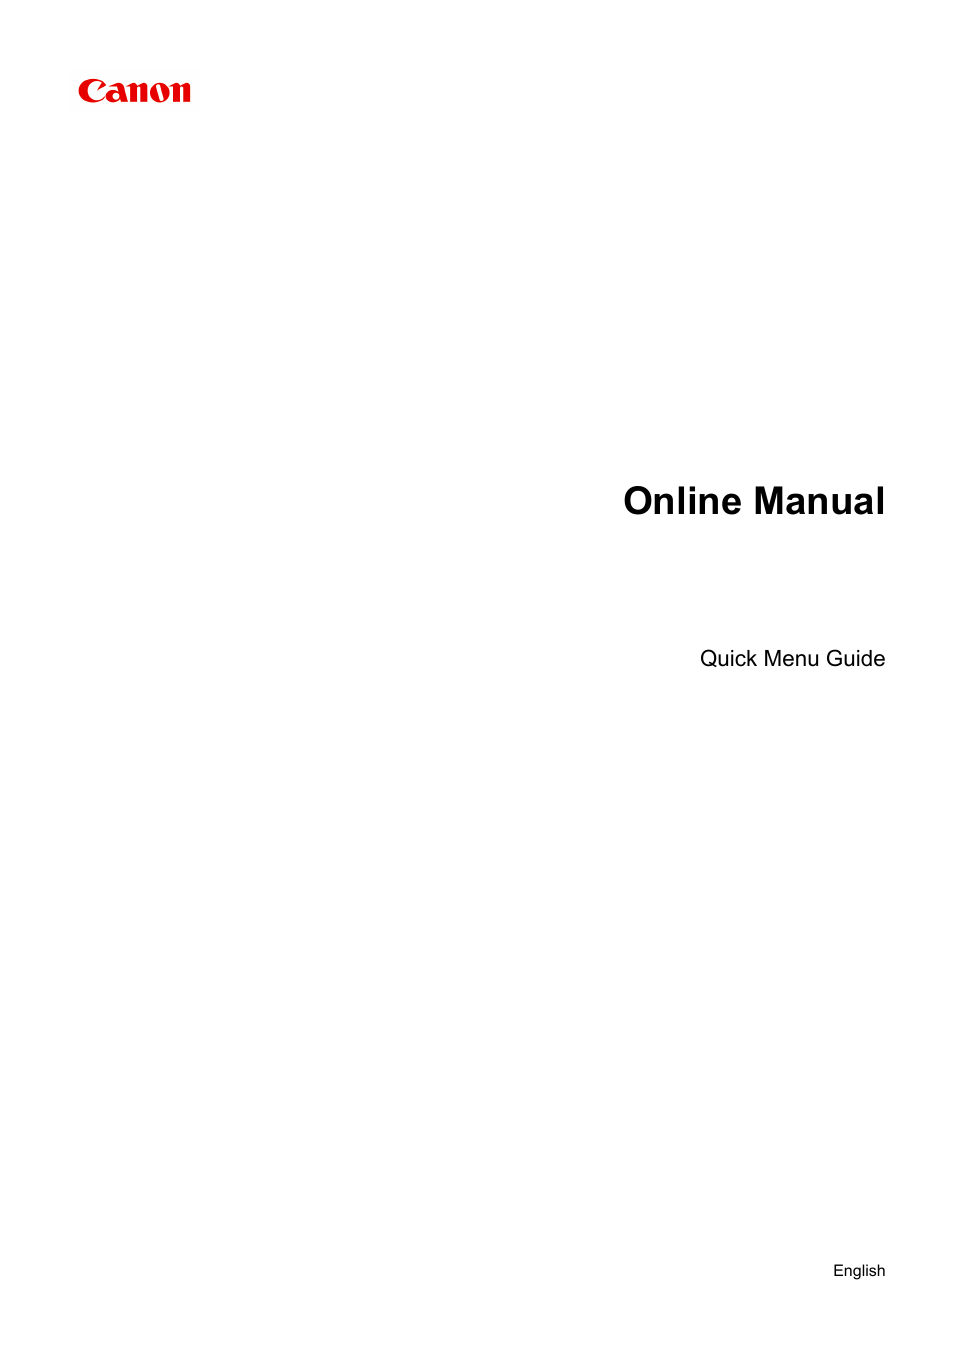 Canon PIXMA MG3550 User Manual | 31 pages